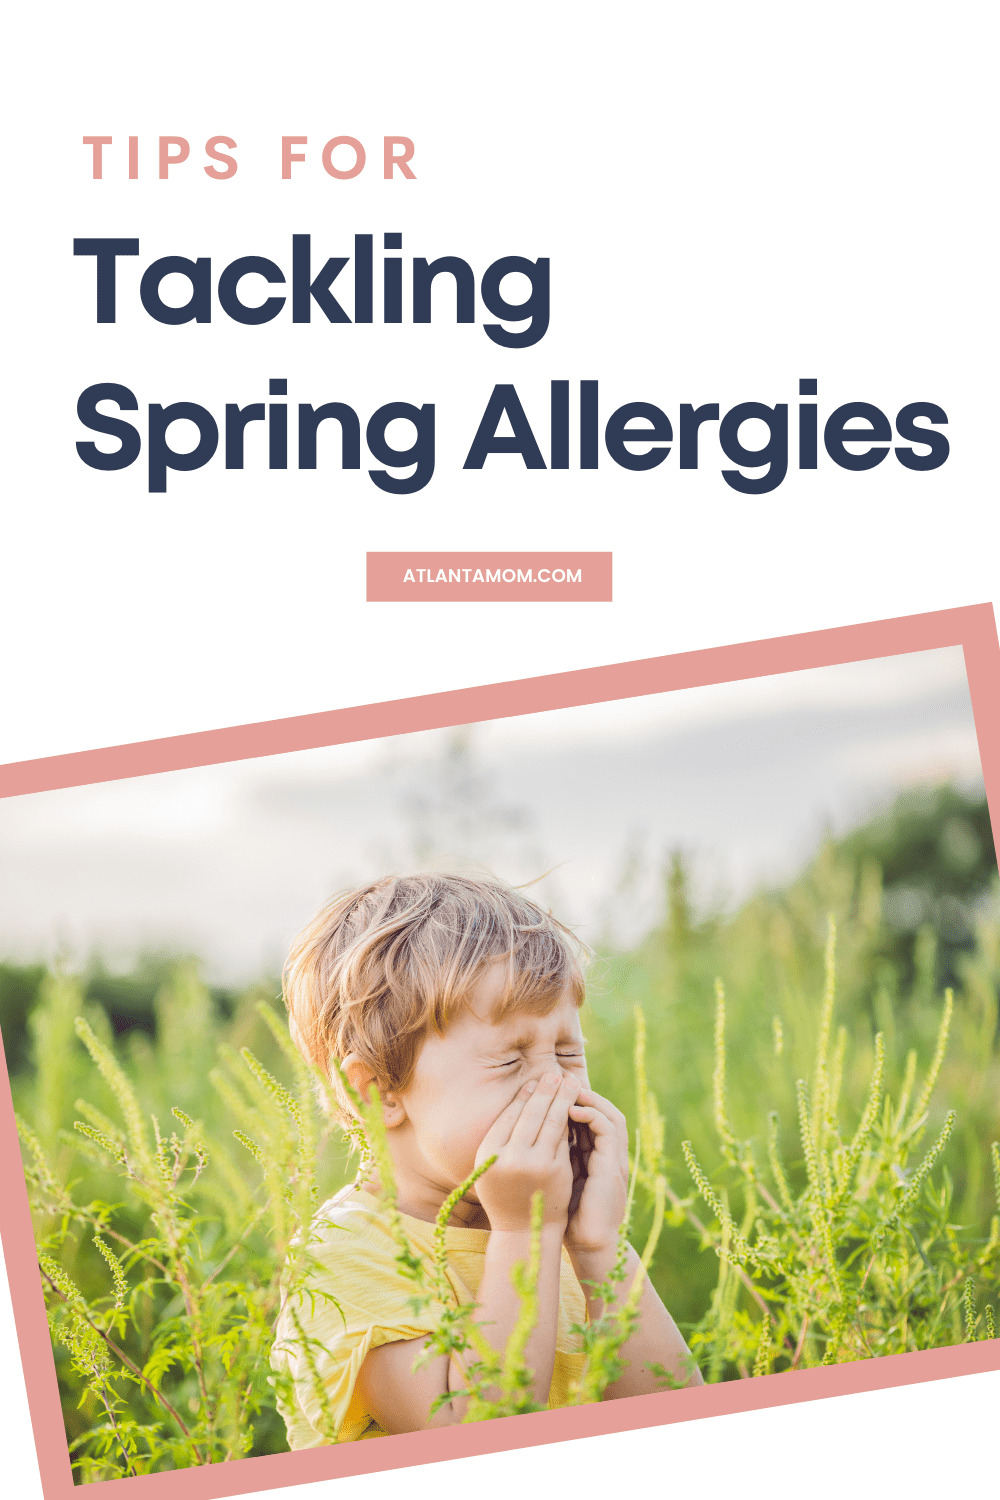 Tips for Tackling Spring Allergies